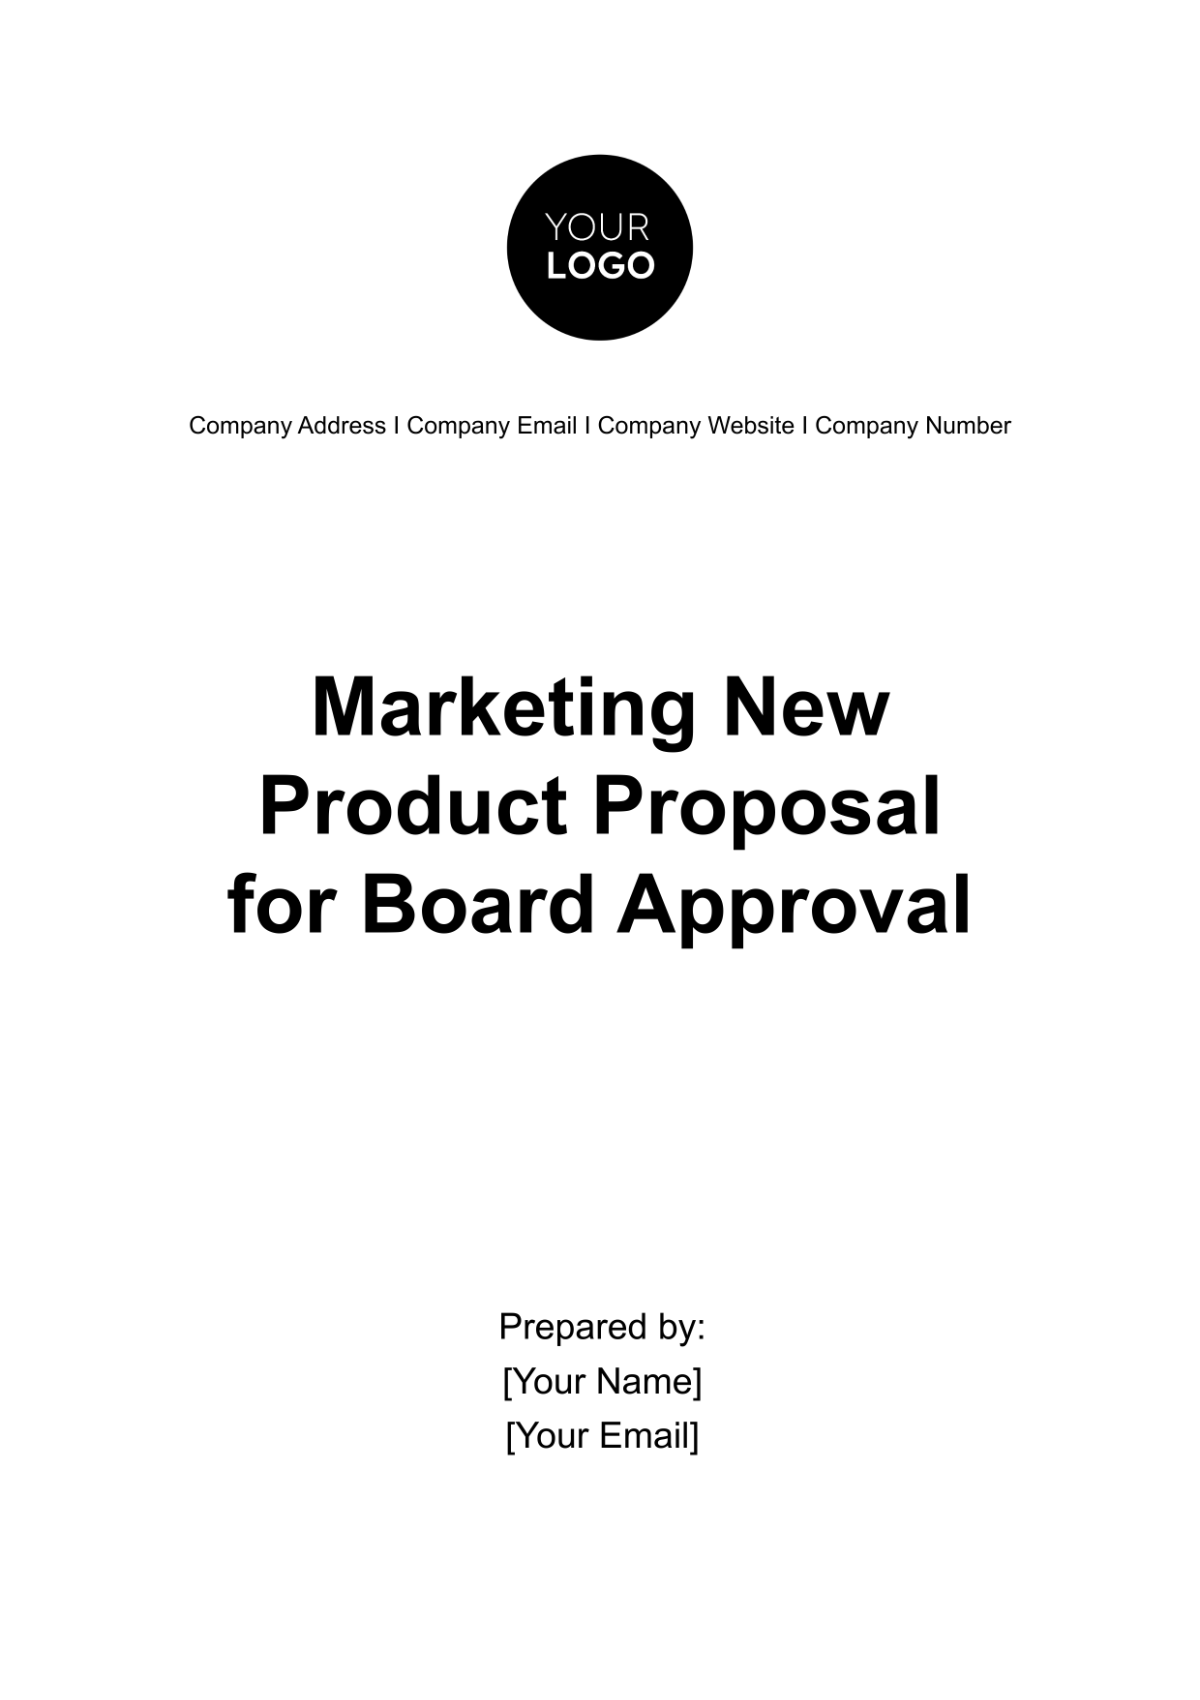 Free Marketing New Product Proposal for Board Approval Template